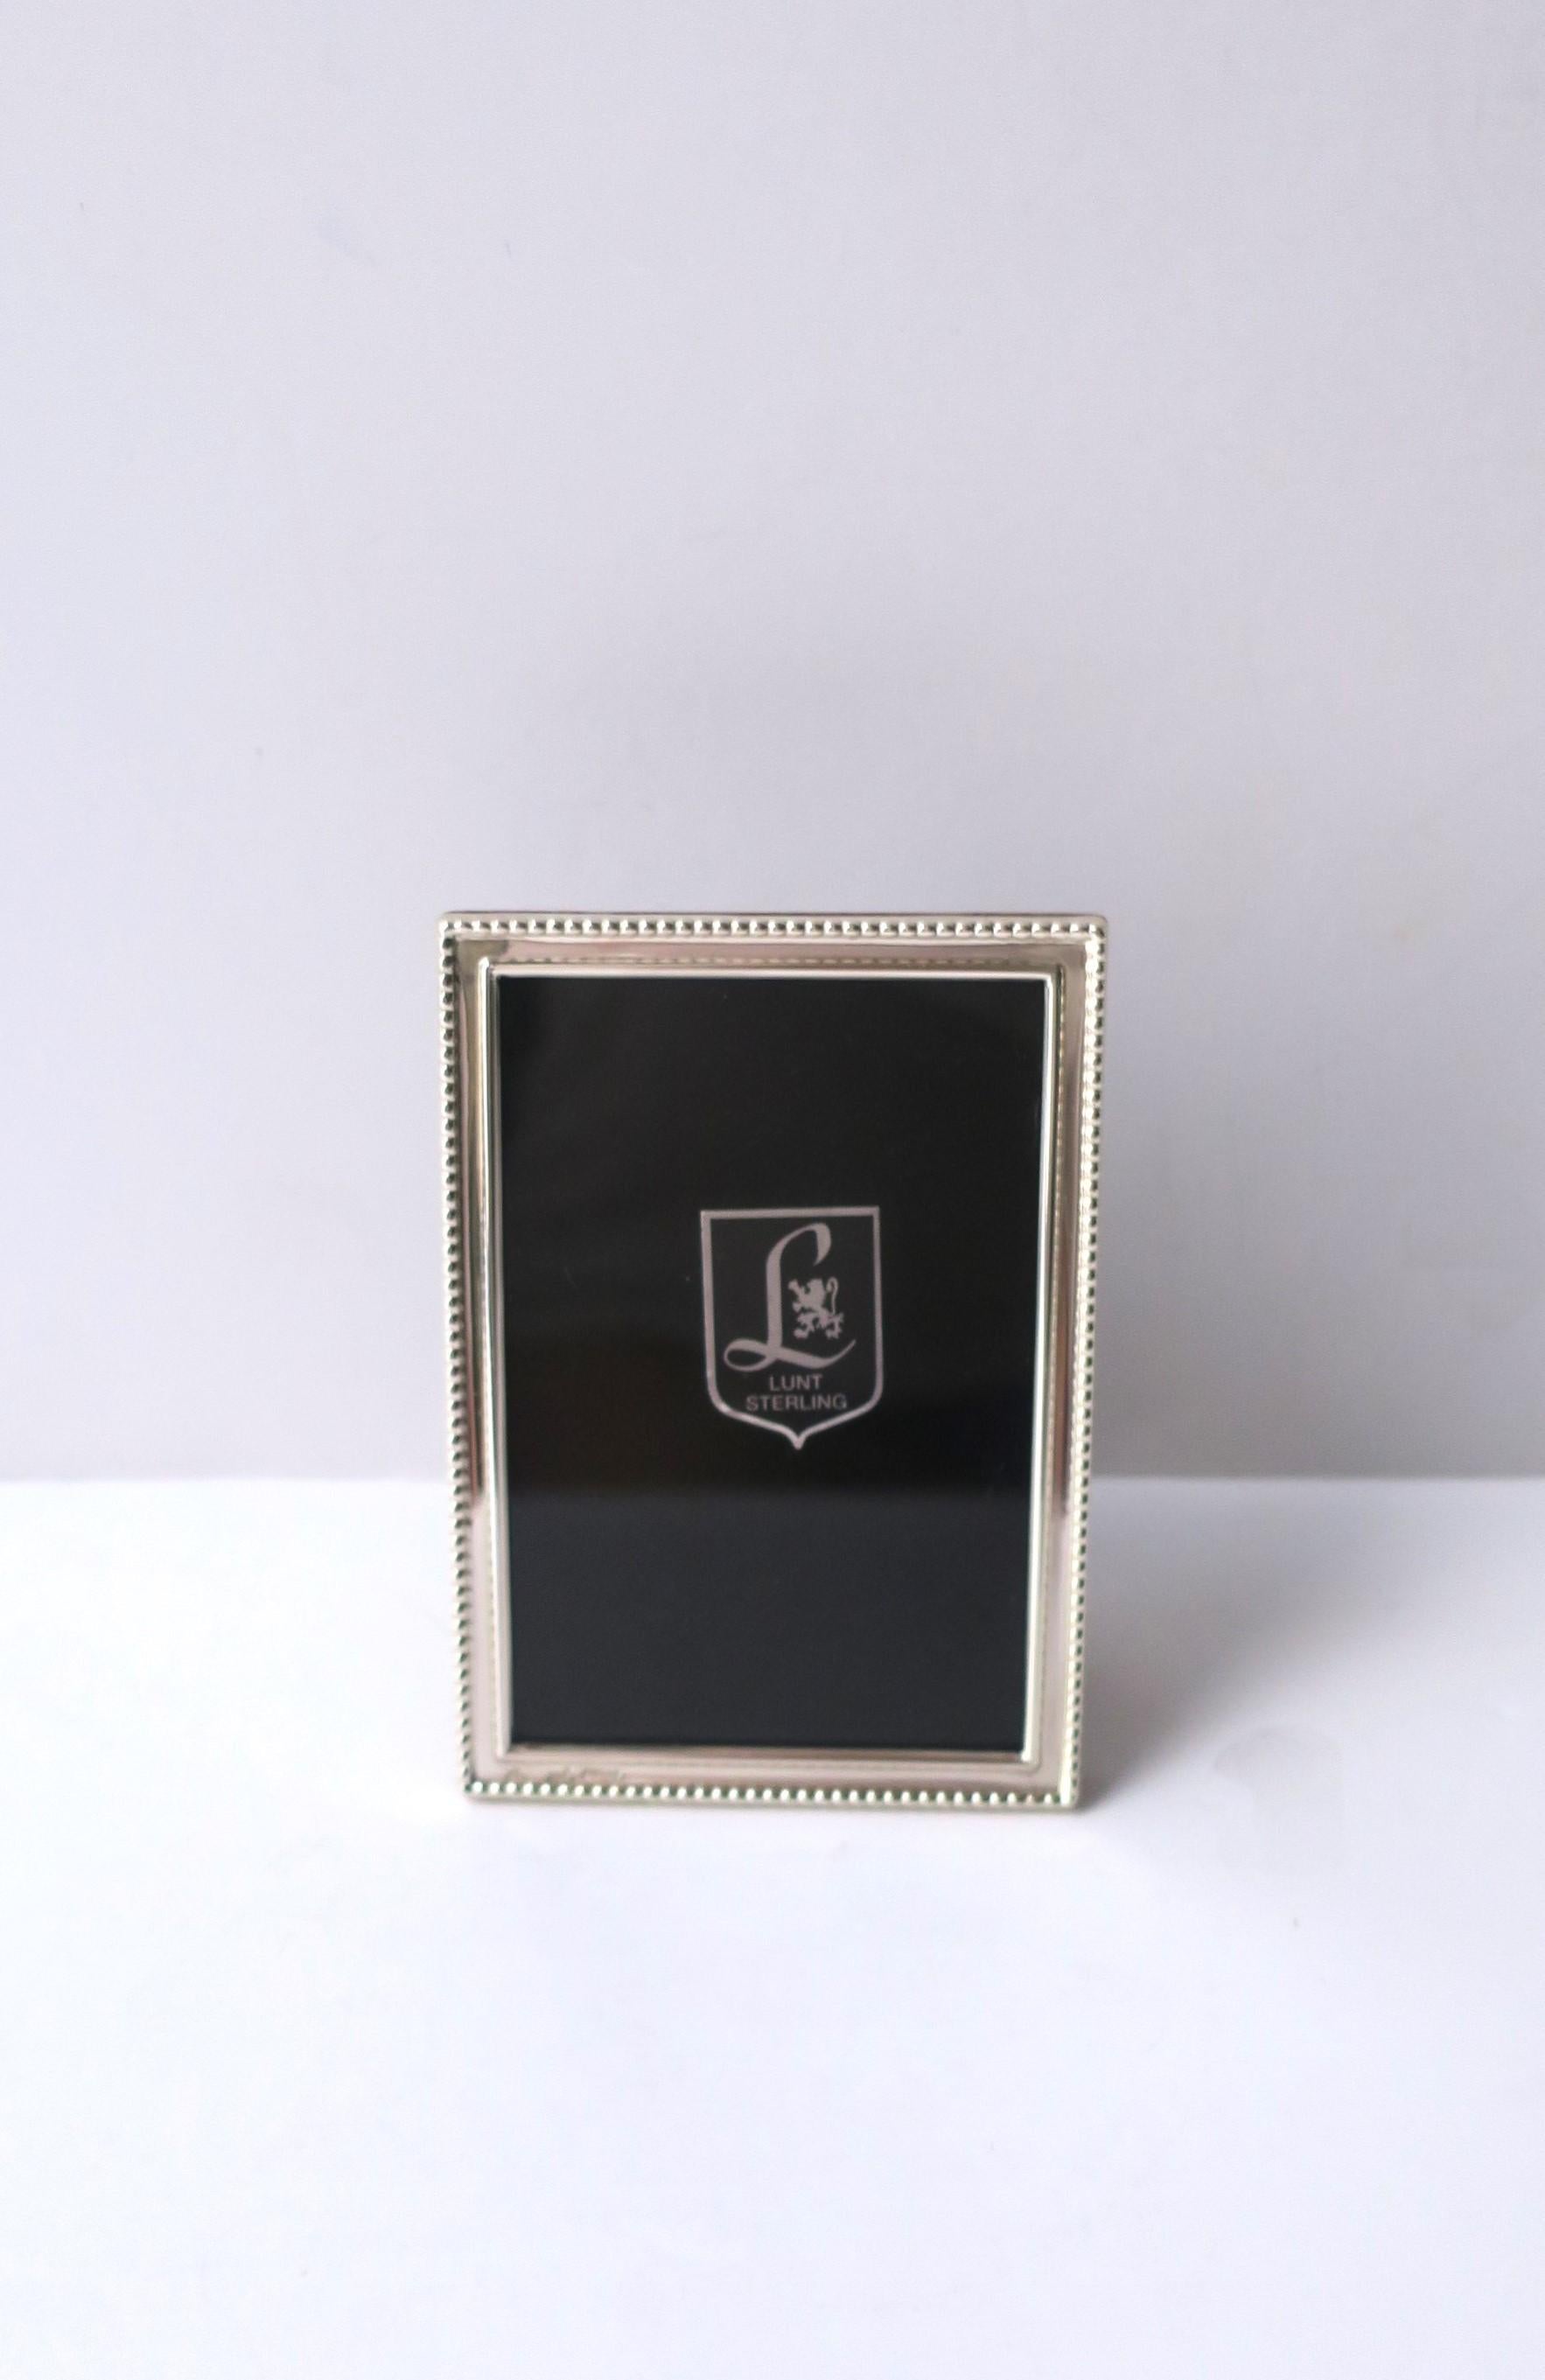 A small, elegant sterling silver picture frame, circa mid-20th century, Spain. A beautifully made sterling silver picture frame which can sit vertical or horizontal (as demonstrated), with a clear lacquer finish requiring no polishing. Marked '925',